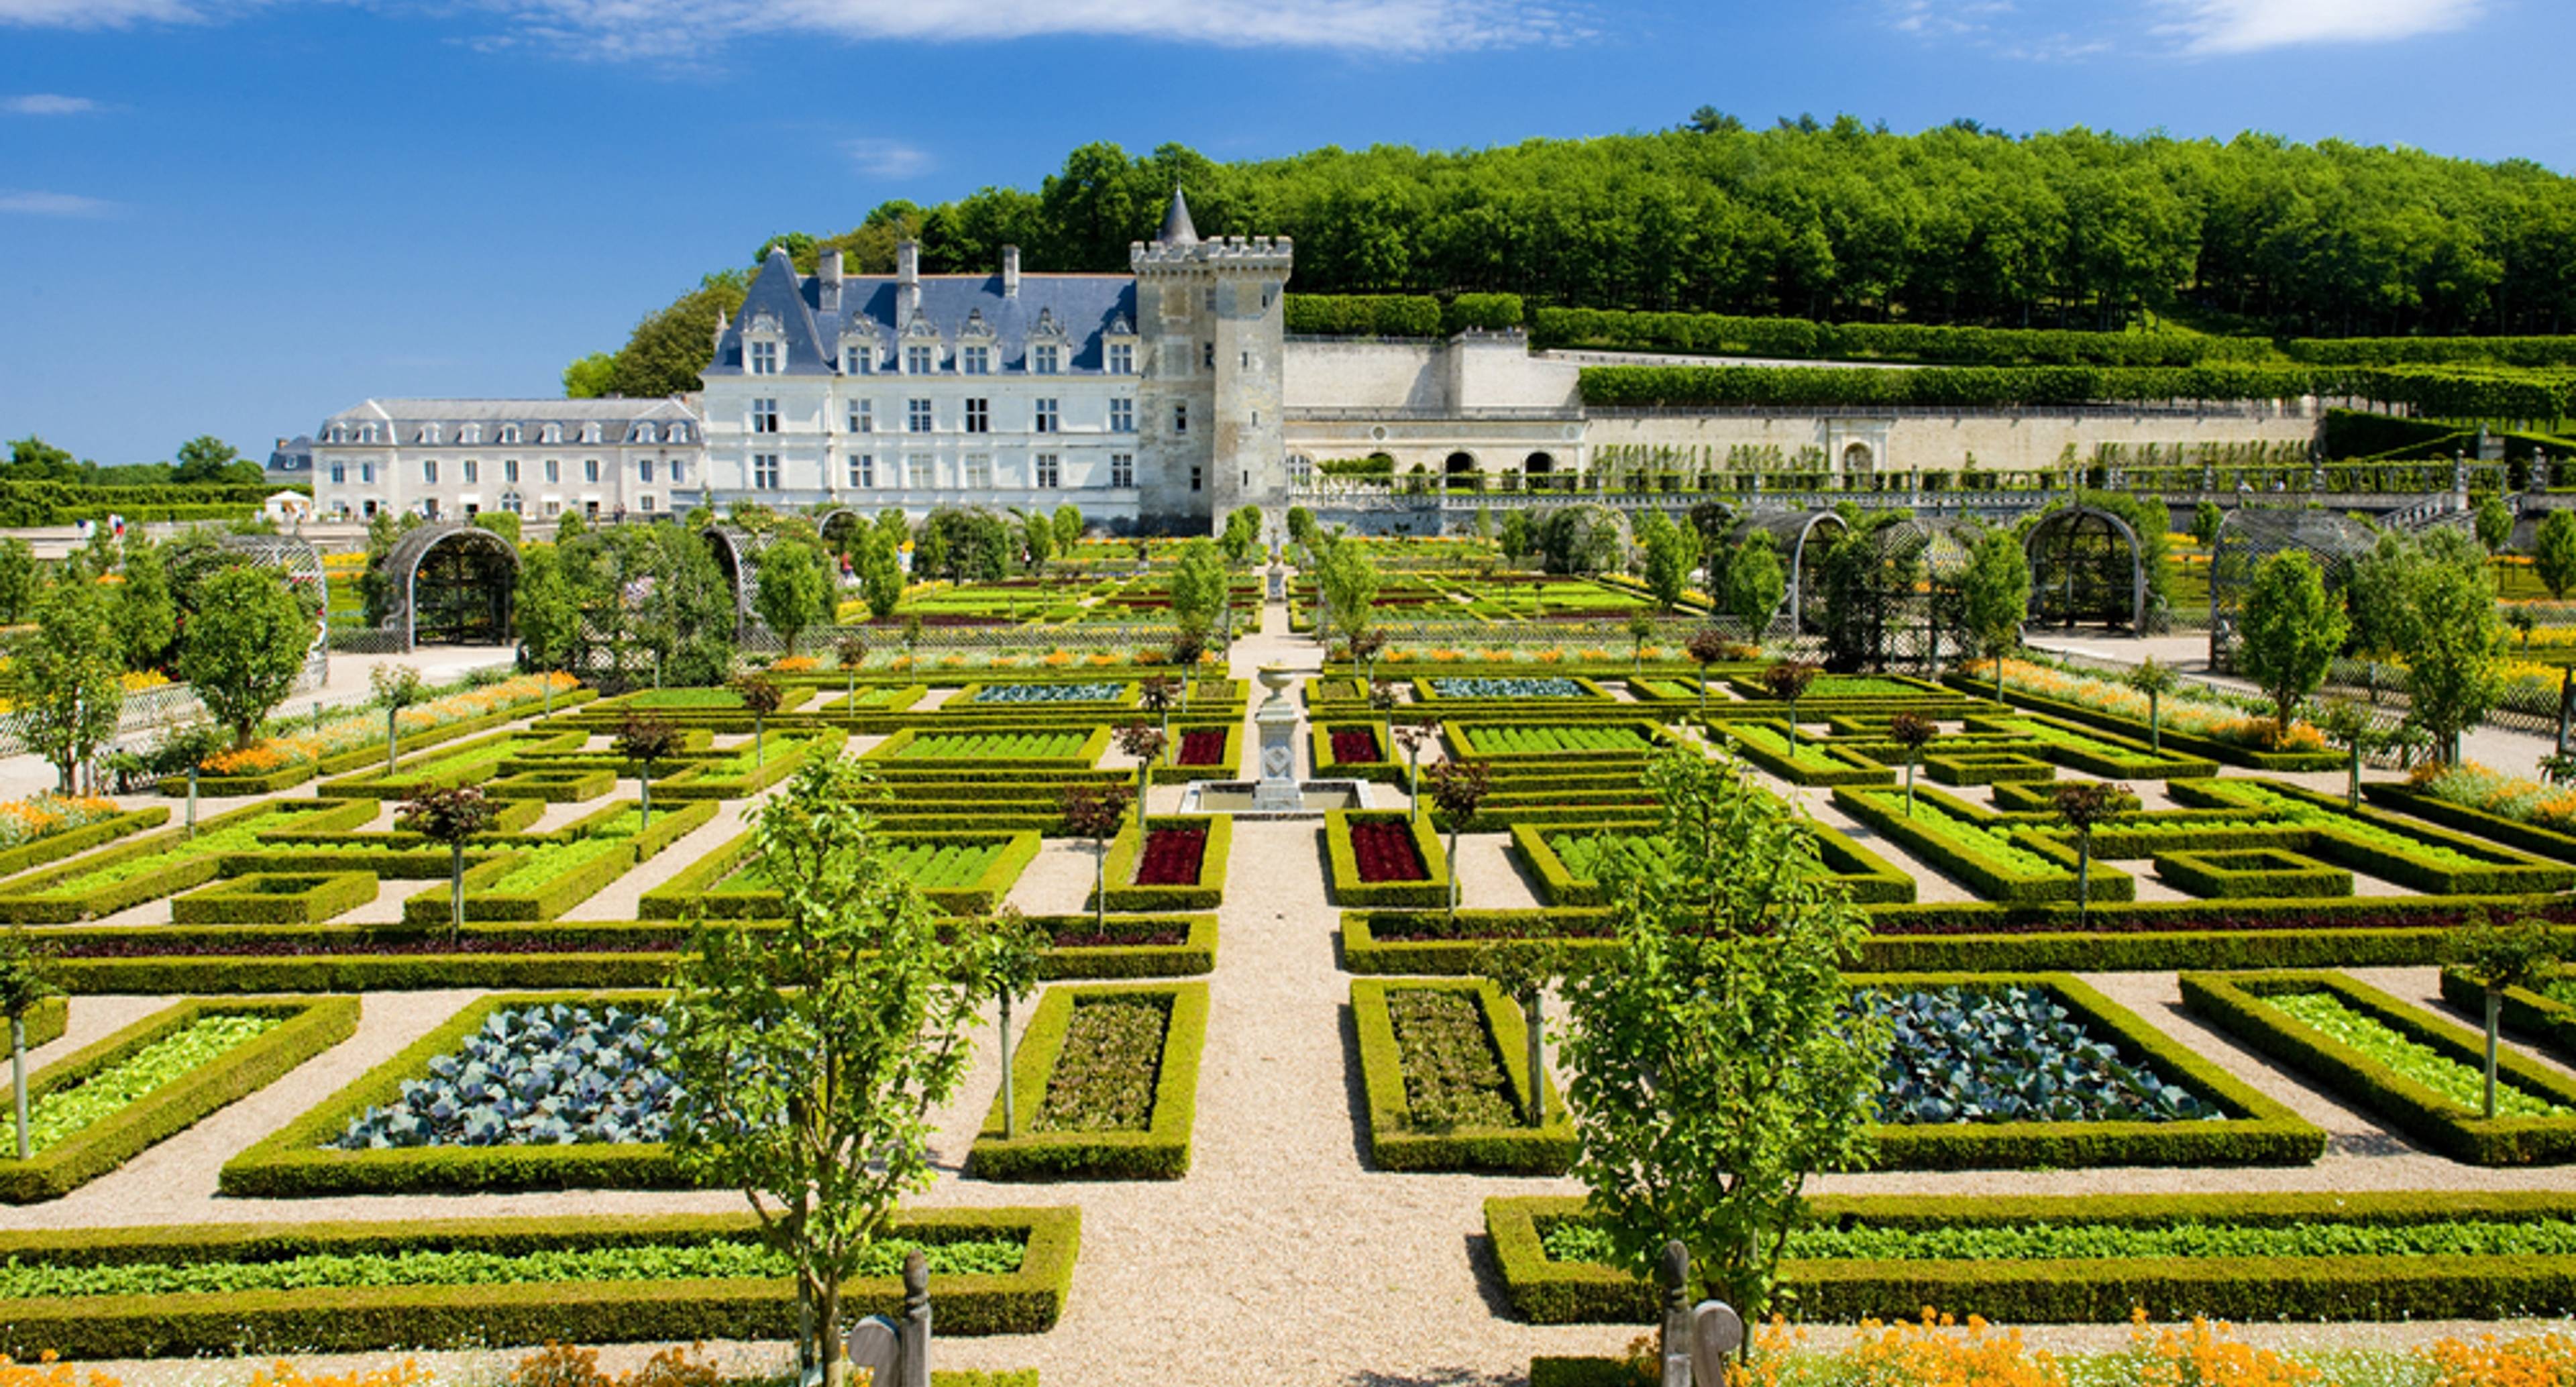 Champagne, Chateaux, Caves & Gardens